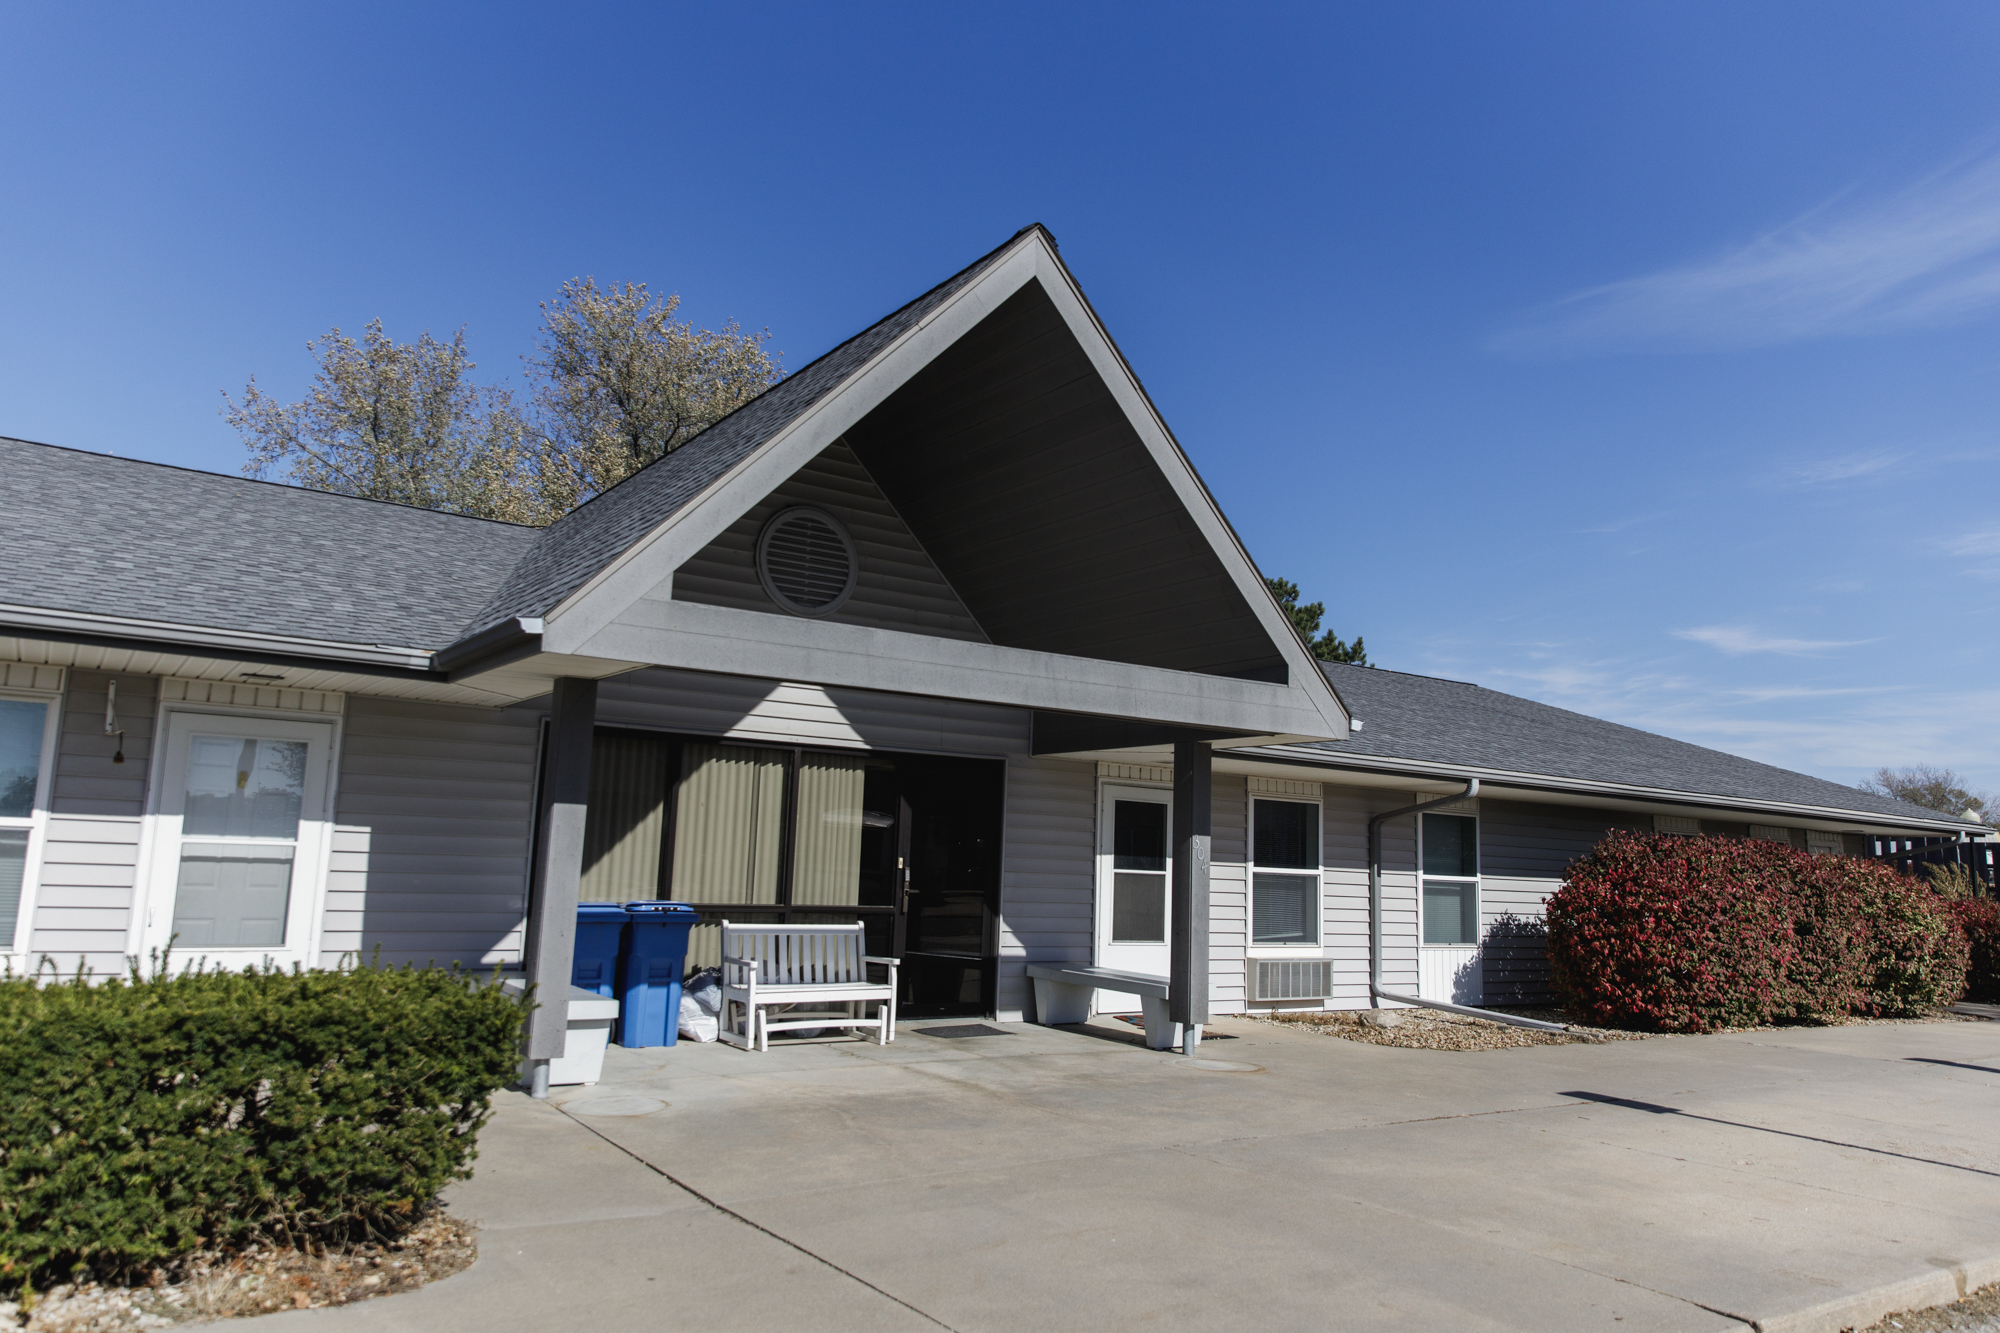 Pictured is the exterior of a home that provides independent housing for a group of adults with disabilities. TVDSI offers residential services for adults with intellectual or developmental disability.